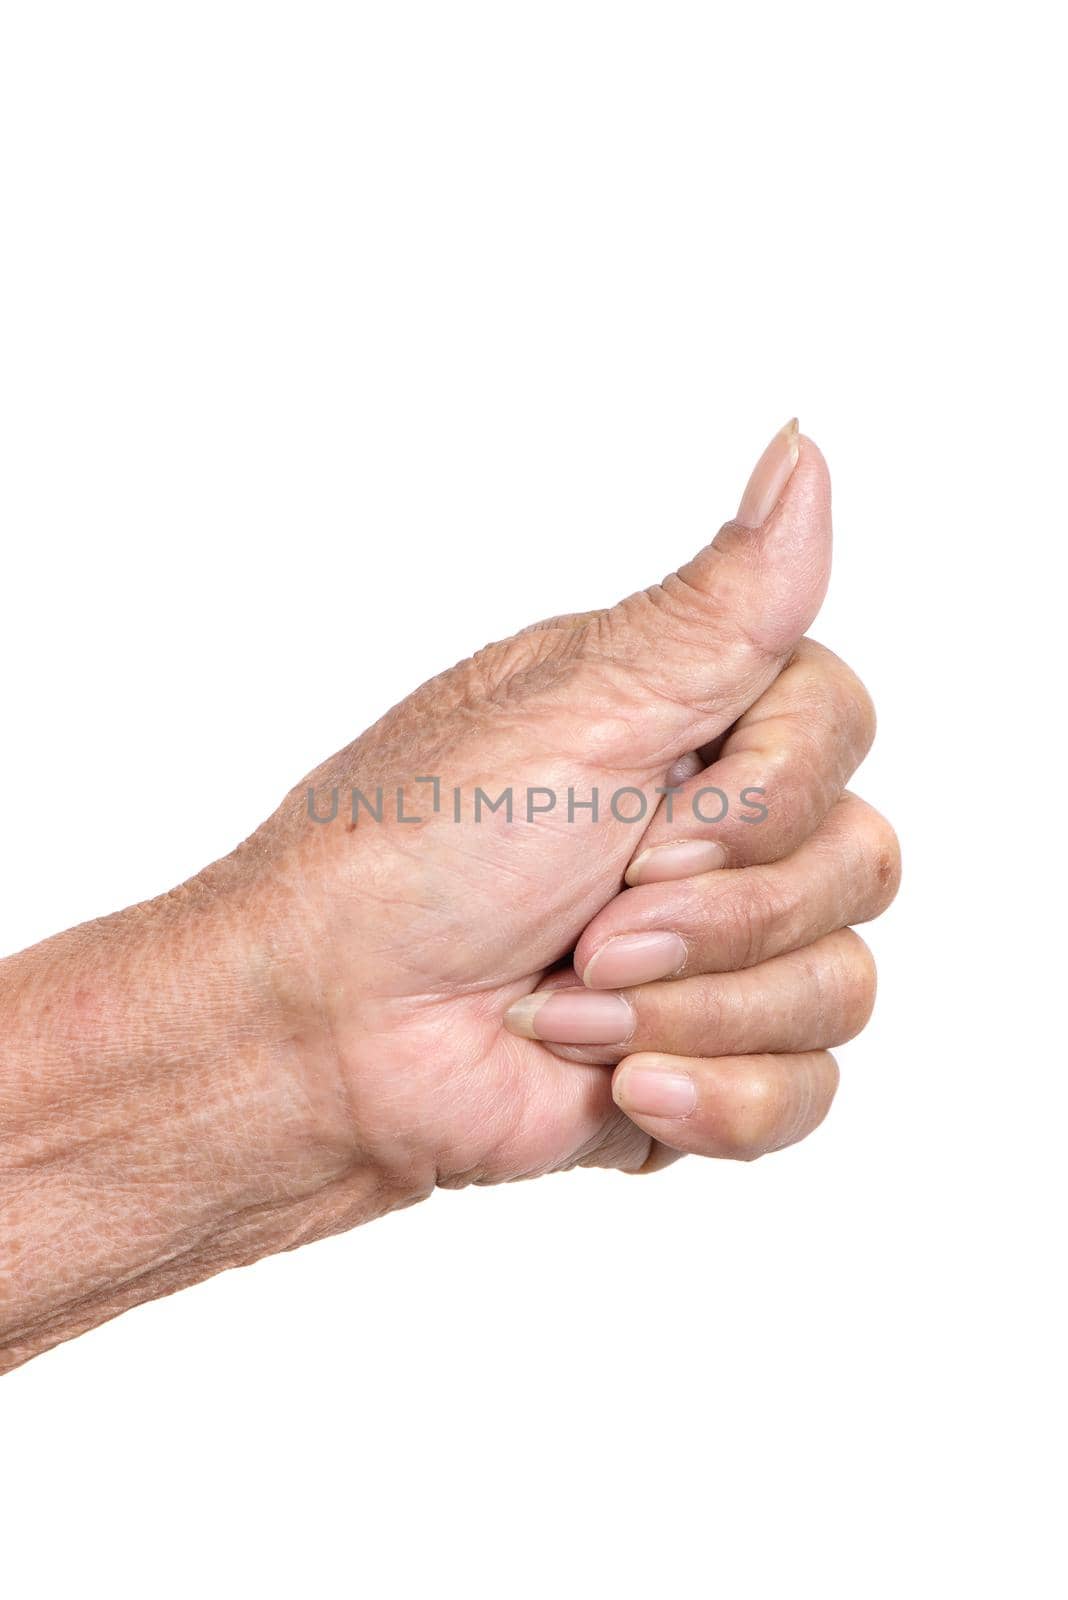 Senior woman's hand gesture isolated on white background